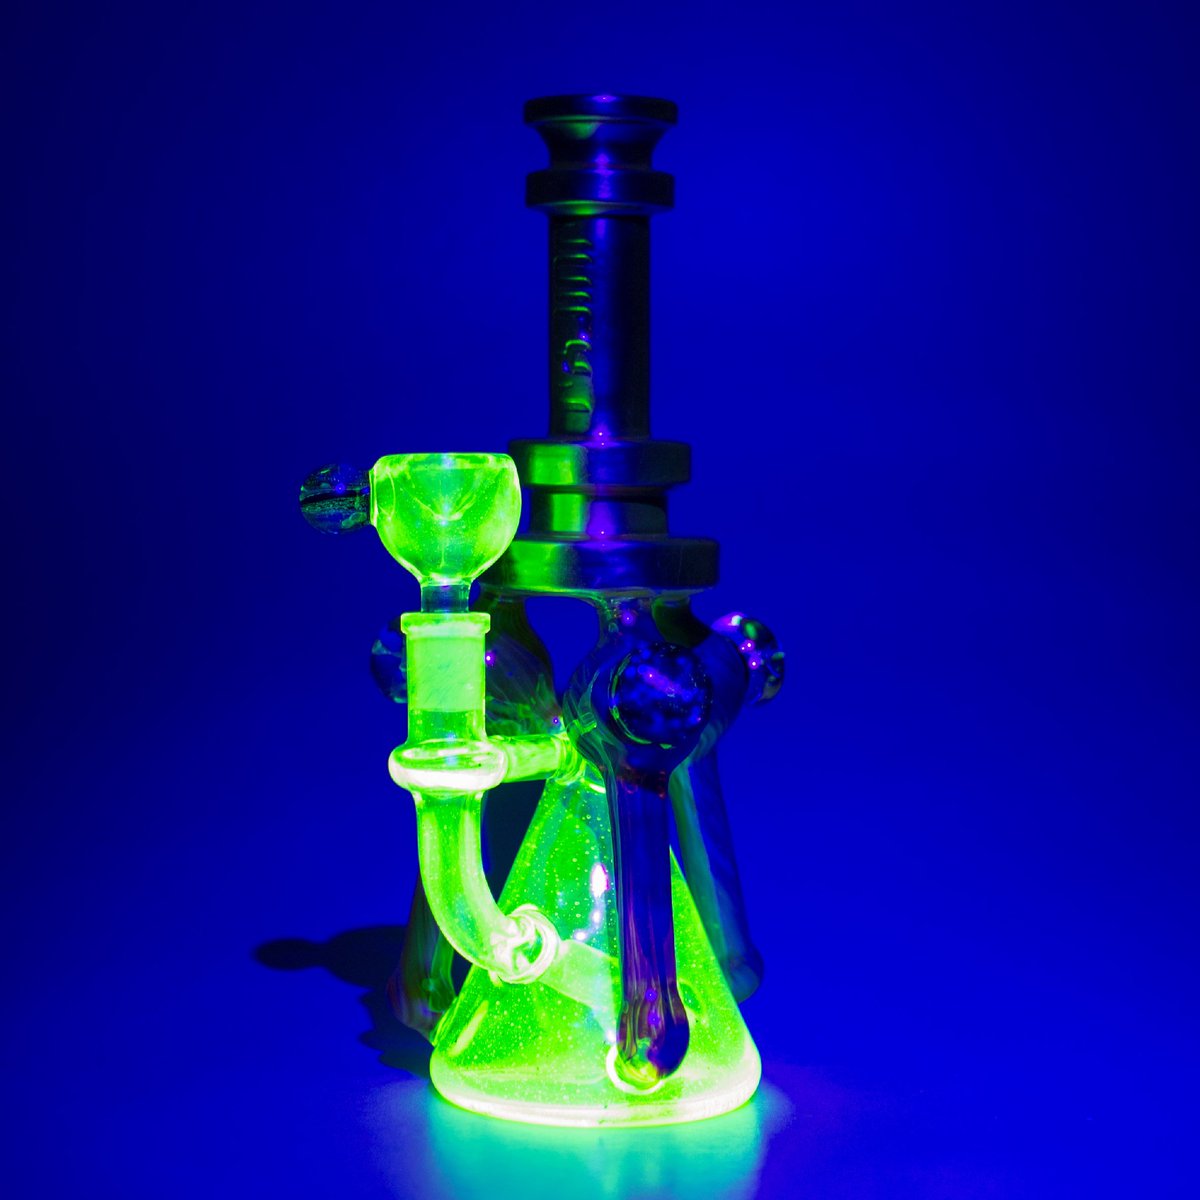 U.V #Diamond Trident. This bad boy has #24kGold with #3Diamonds and glows under U.V light. #issa bong #lit #handcrated #juicyj get yours at juicyjglass.com